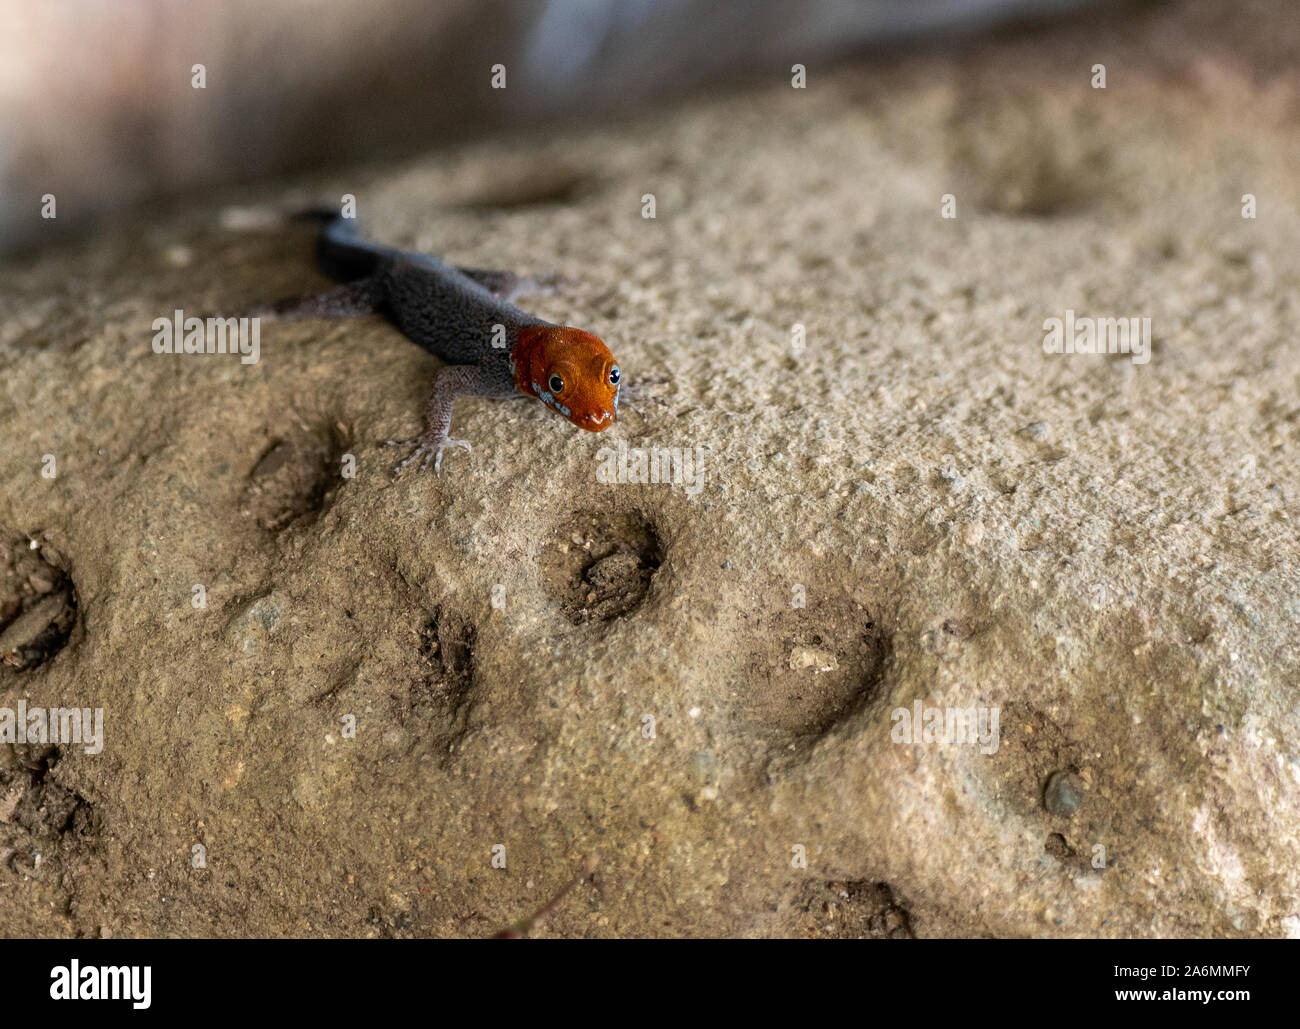 A Yellow-headed Gecko on a Rock in Costa Rica Stock Photo